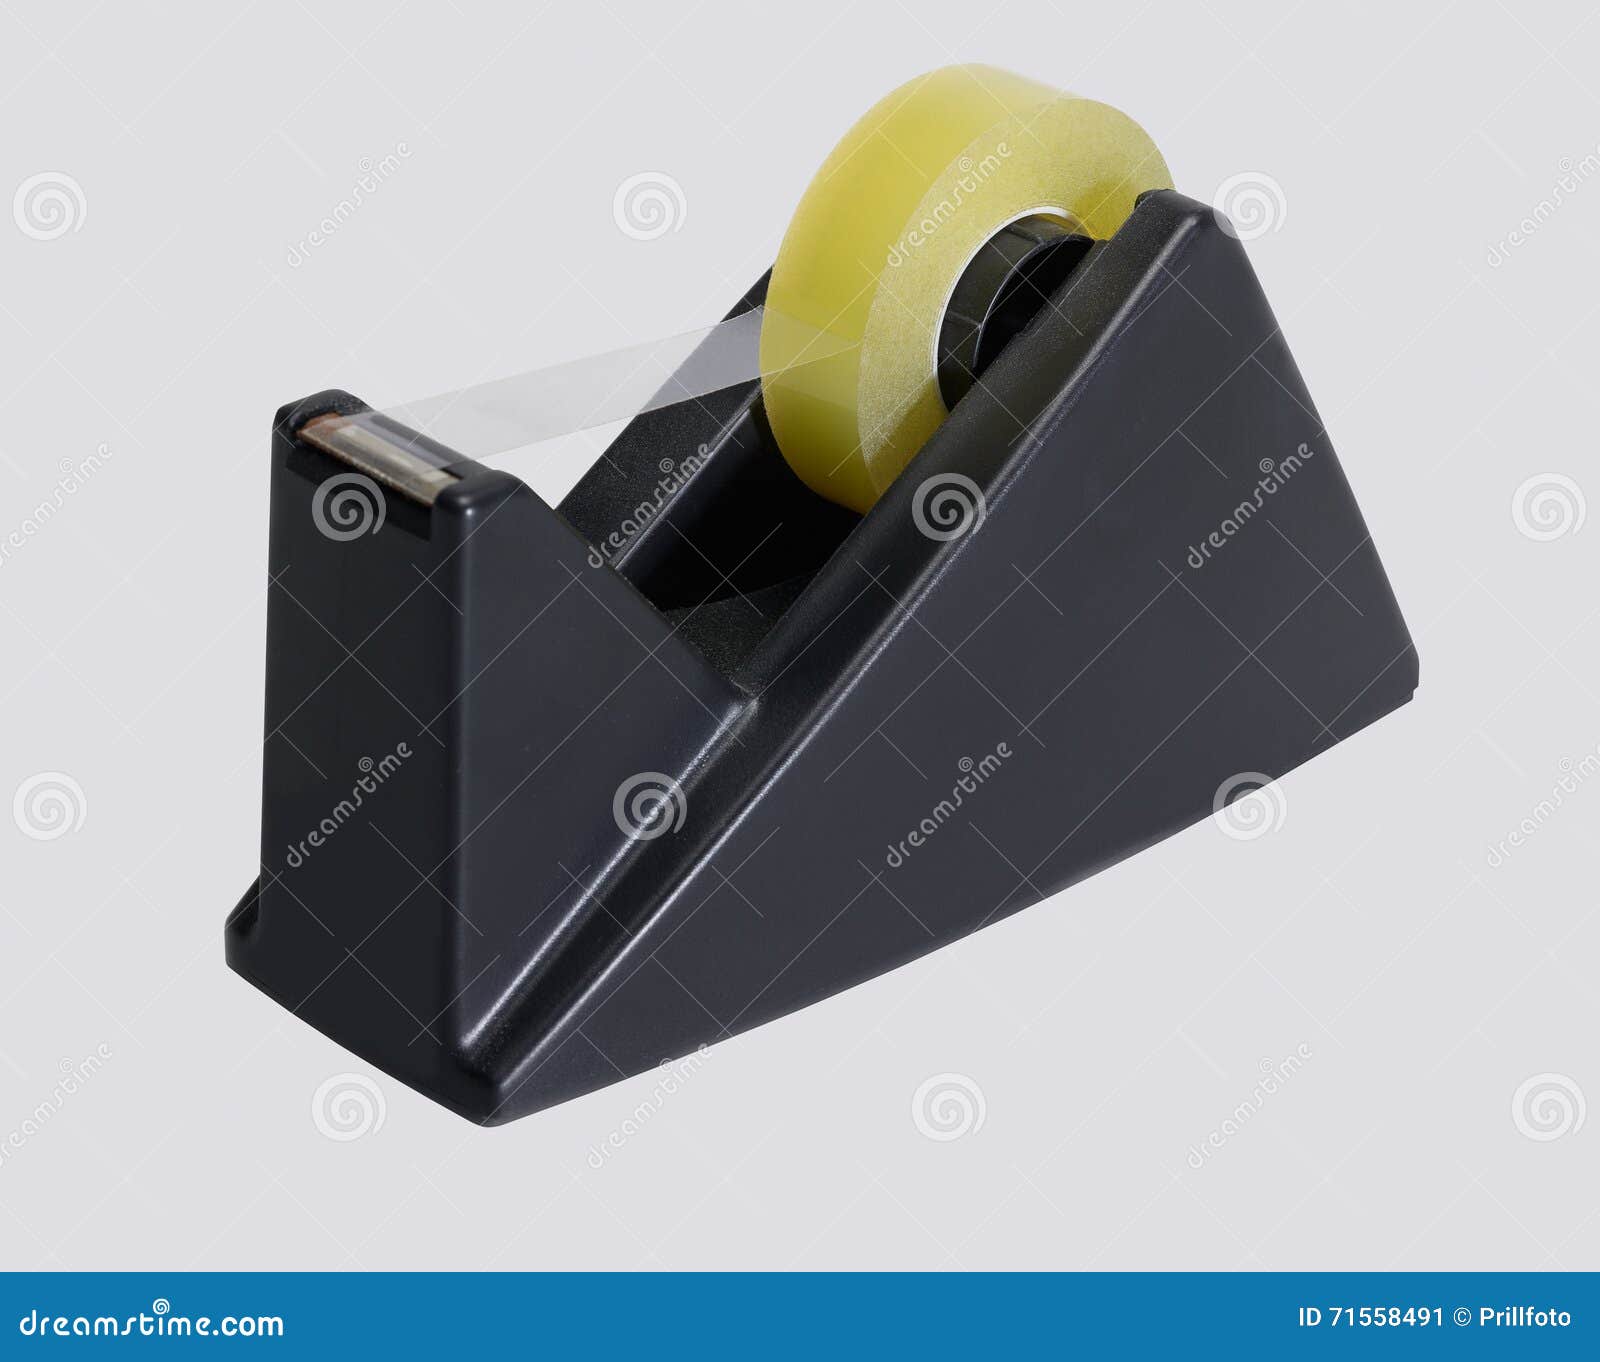 Adhesive tape roller stock image. Image of instrument - 71558491